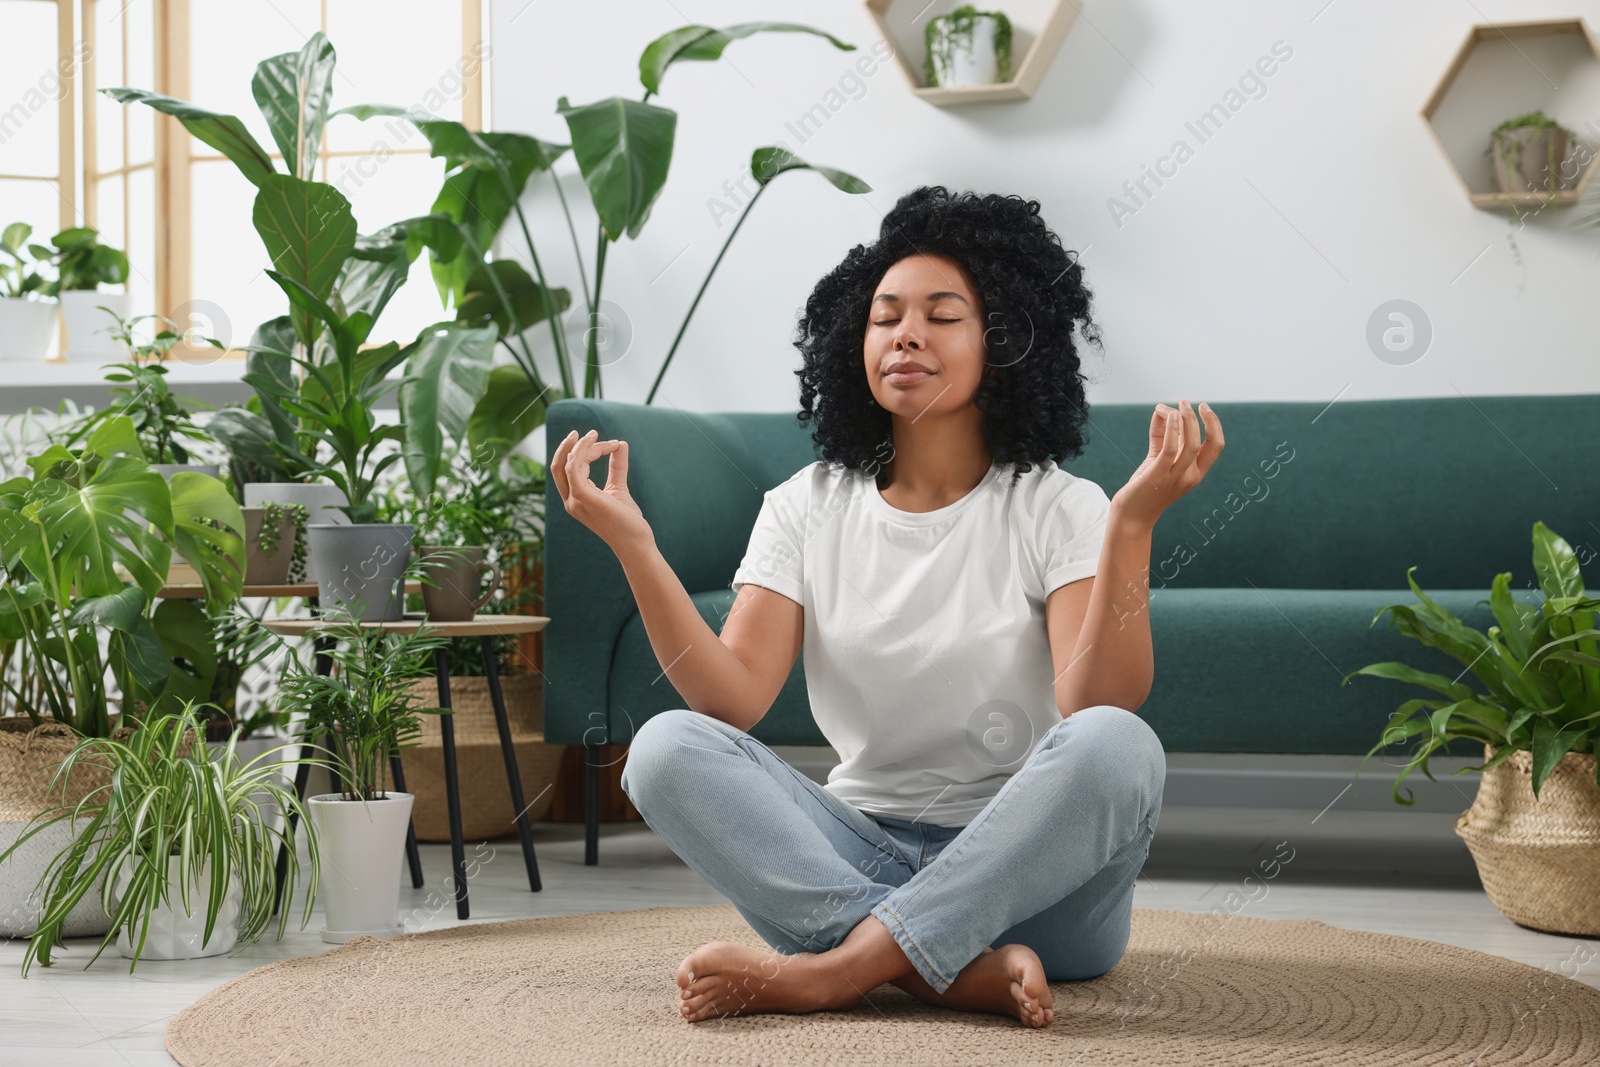 Photo of Relaxing atmosphere. Woman meditating near potted houseplants in room